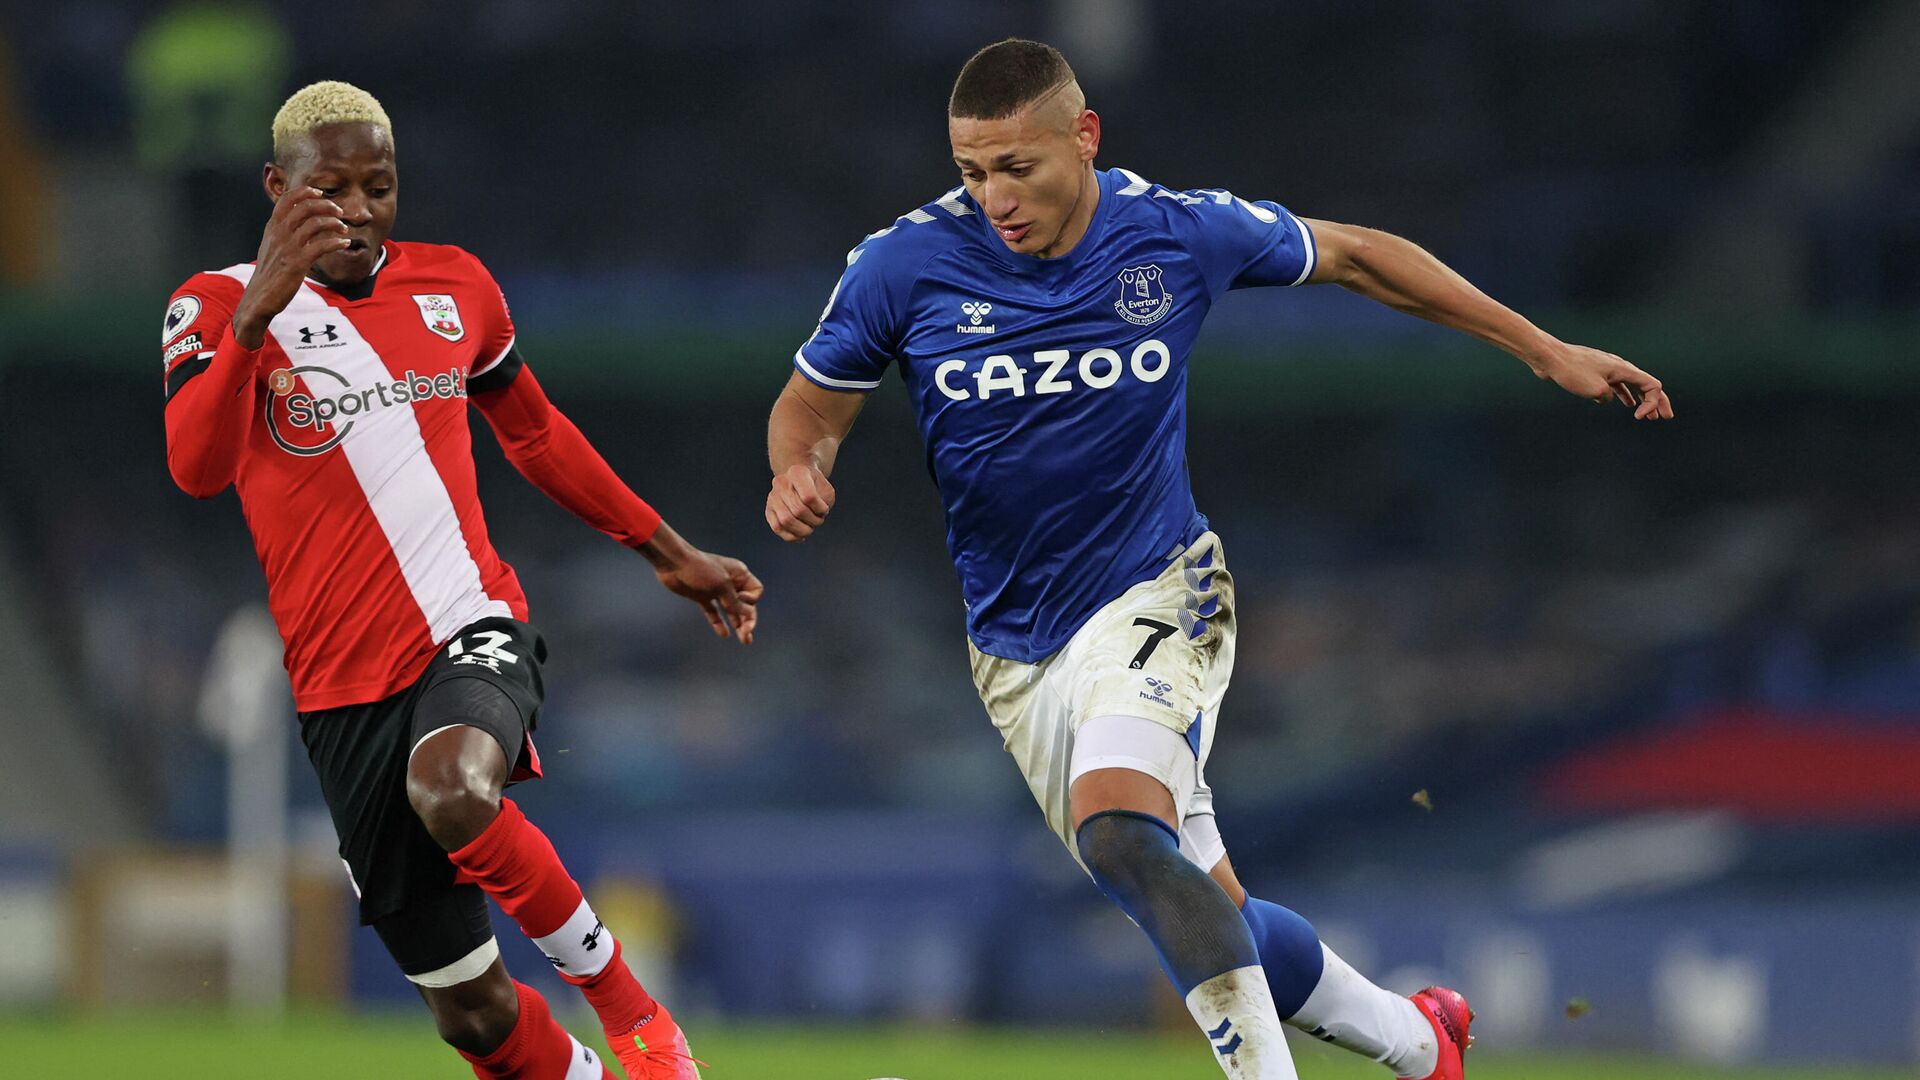 Southampton's Malian midfielder Moussa Djenepo (L) vies with Everton's Brazilian striker Richarlison (R) during the English Premier League football match between Everton and Southampton at Goodison Park in Liverpool, north west England on March 1, 2021. (Photo by Clive Brunskill / POOL / AFP) / RESTRICTED TO EDITORIAL USE. No use with unauthorized audio, video, data, fixture lists, club/league logos or 'live' services. Online in-match use limited to 120 images. An additional 40 images may be used in extra time. No video emulation. Social media in-match use limited to 120 images. An additional 40 images may be used in extra time. No use in betting publications, games or single club/league/player publications. /  - РИА Новости, 1920, 02.03.2021